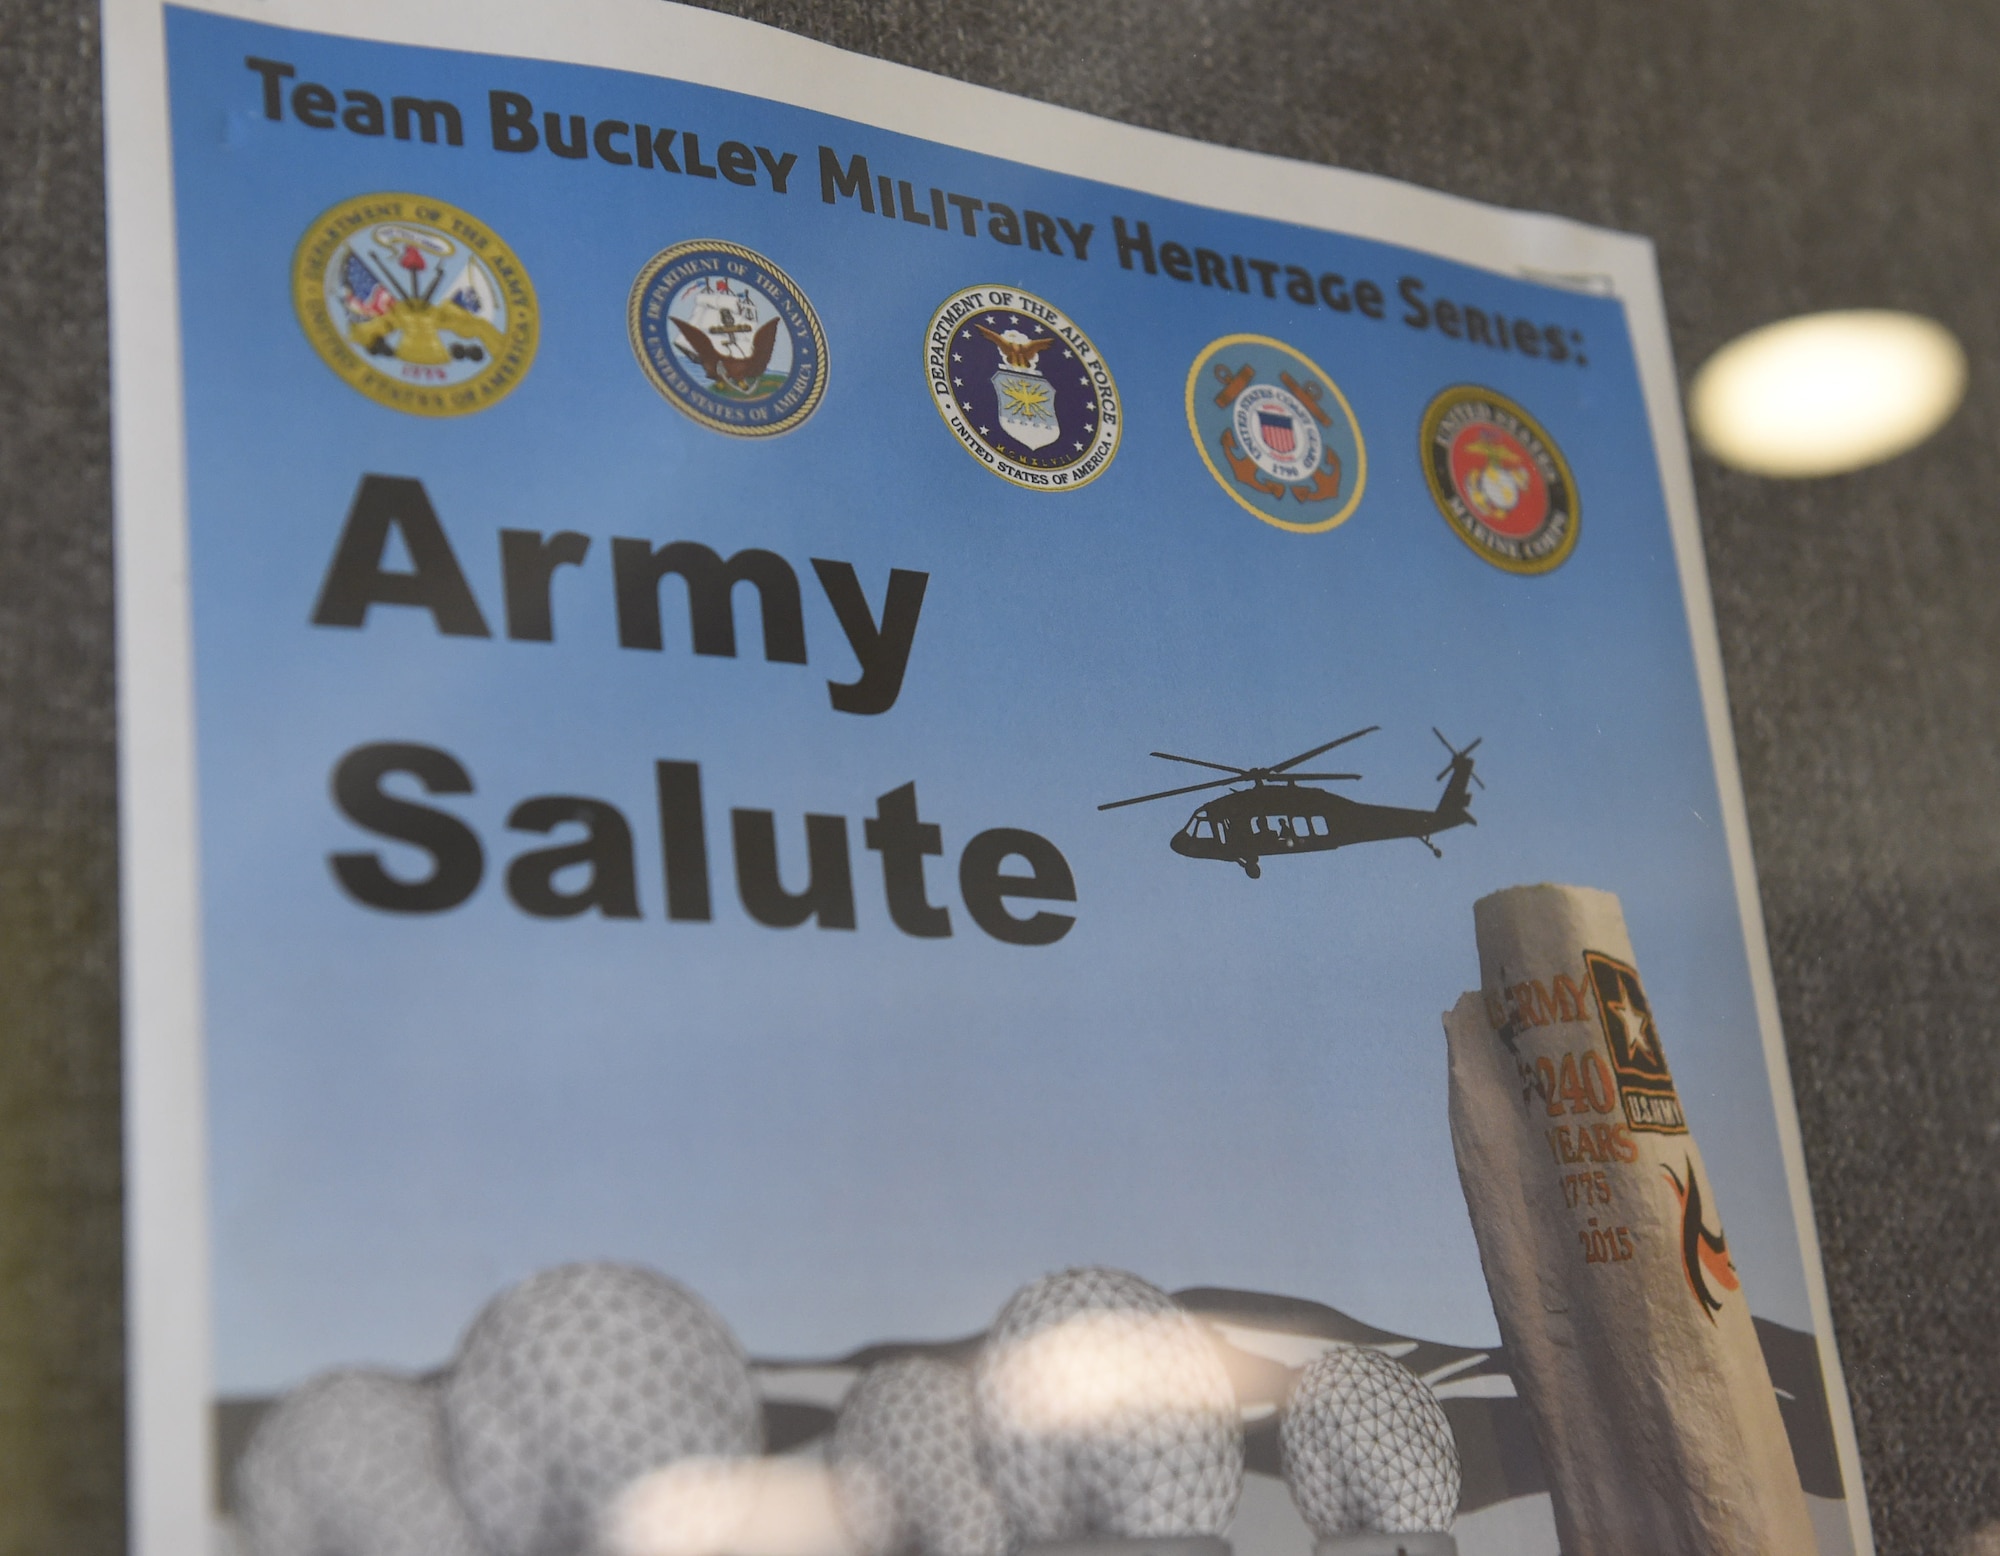 A flier advertises the Team Buckley Military Heritage Series: Army Salute celebration June 26, 2015, at Panther Den on Buckley Air Force Base, Colo. The Army Salute, which included displays, brief presentations and free food, was held to celebrate the Army’s 240th birthday and its history on Buckley AFB. (U.S. Air Force photo by Airman 1st Class Samantha Meadors/Released)